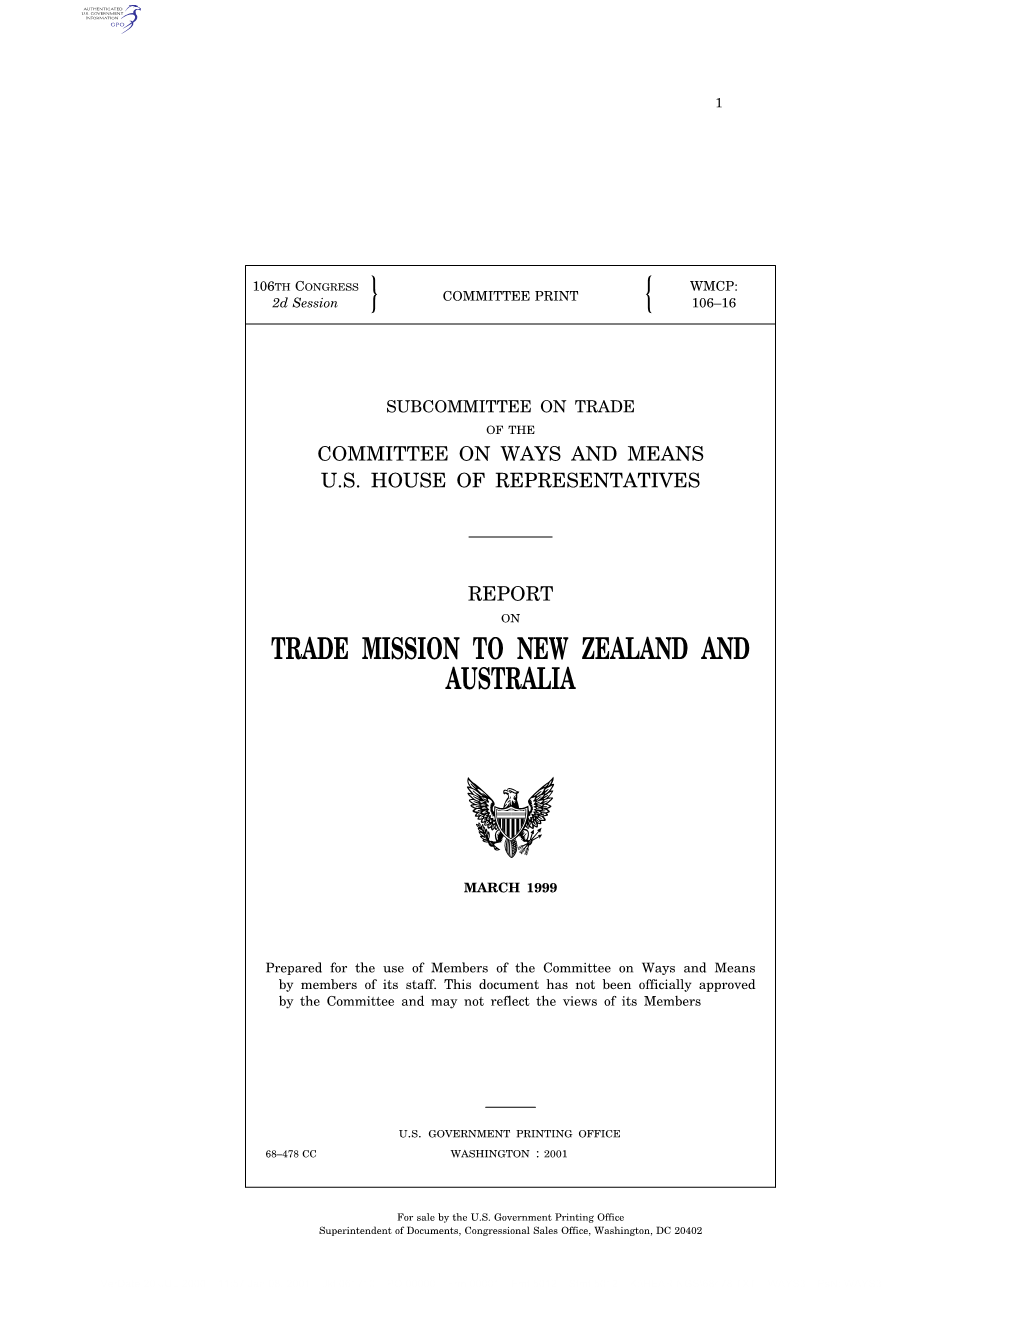 Trade Mission to New Zealand and Australia